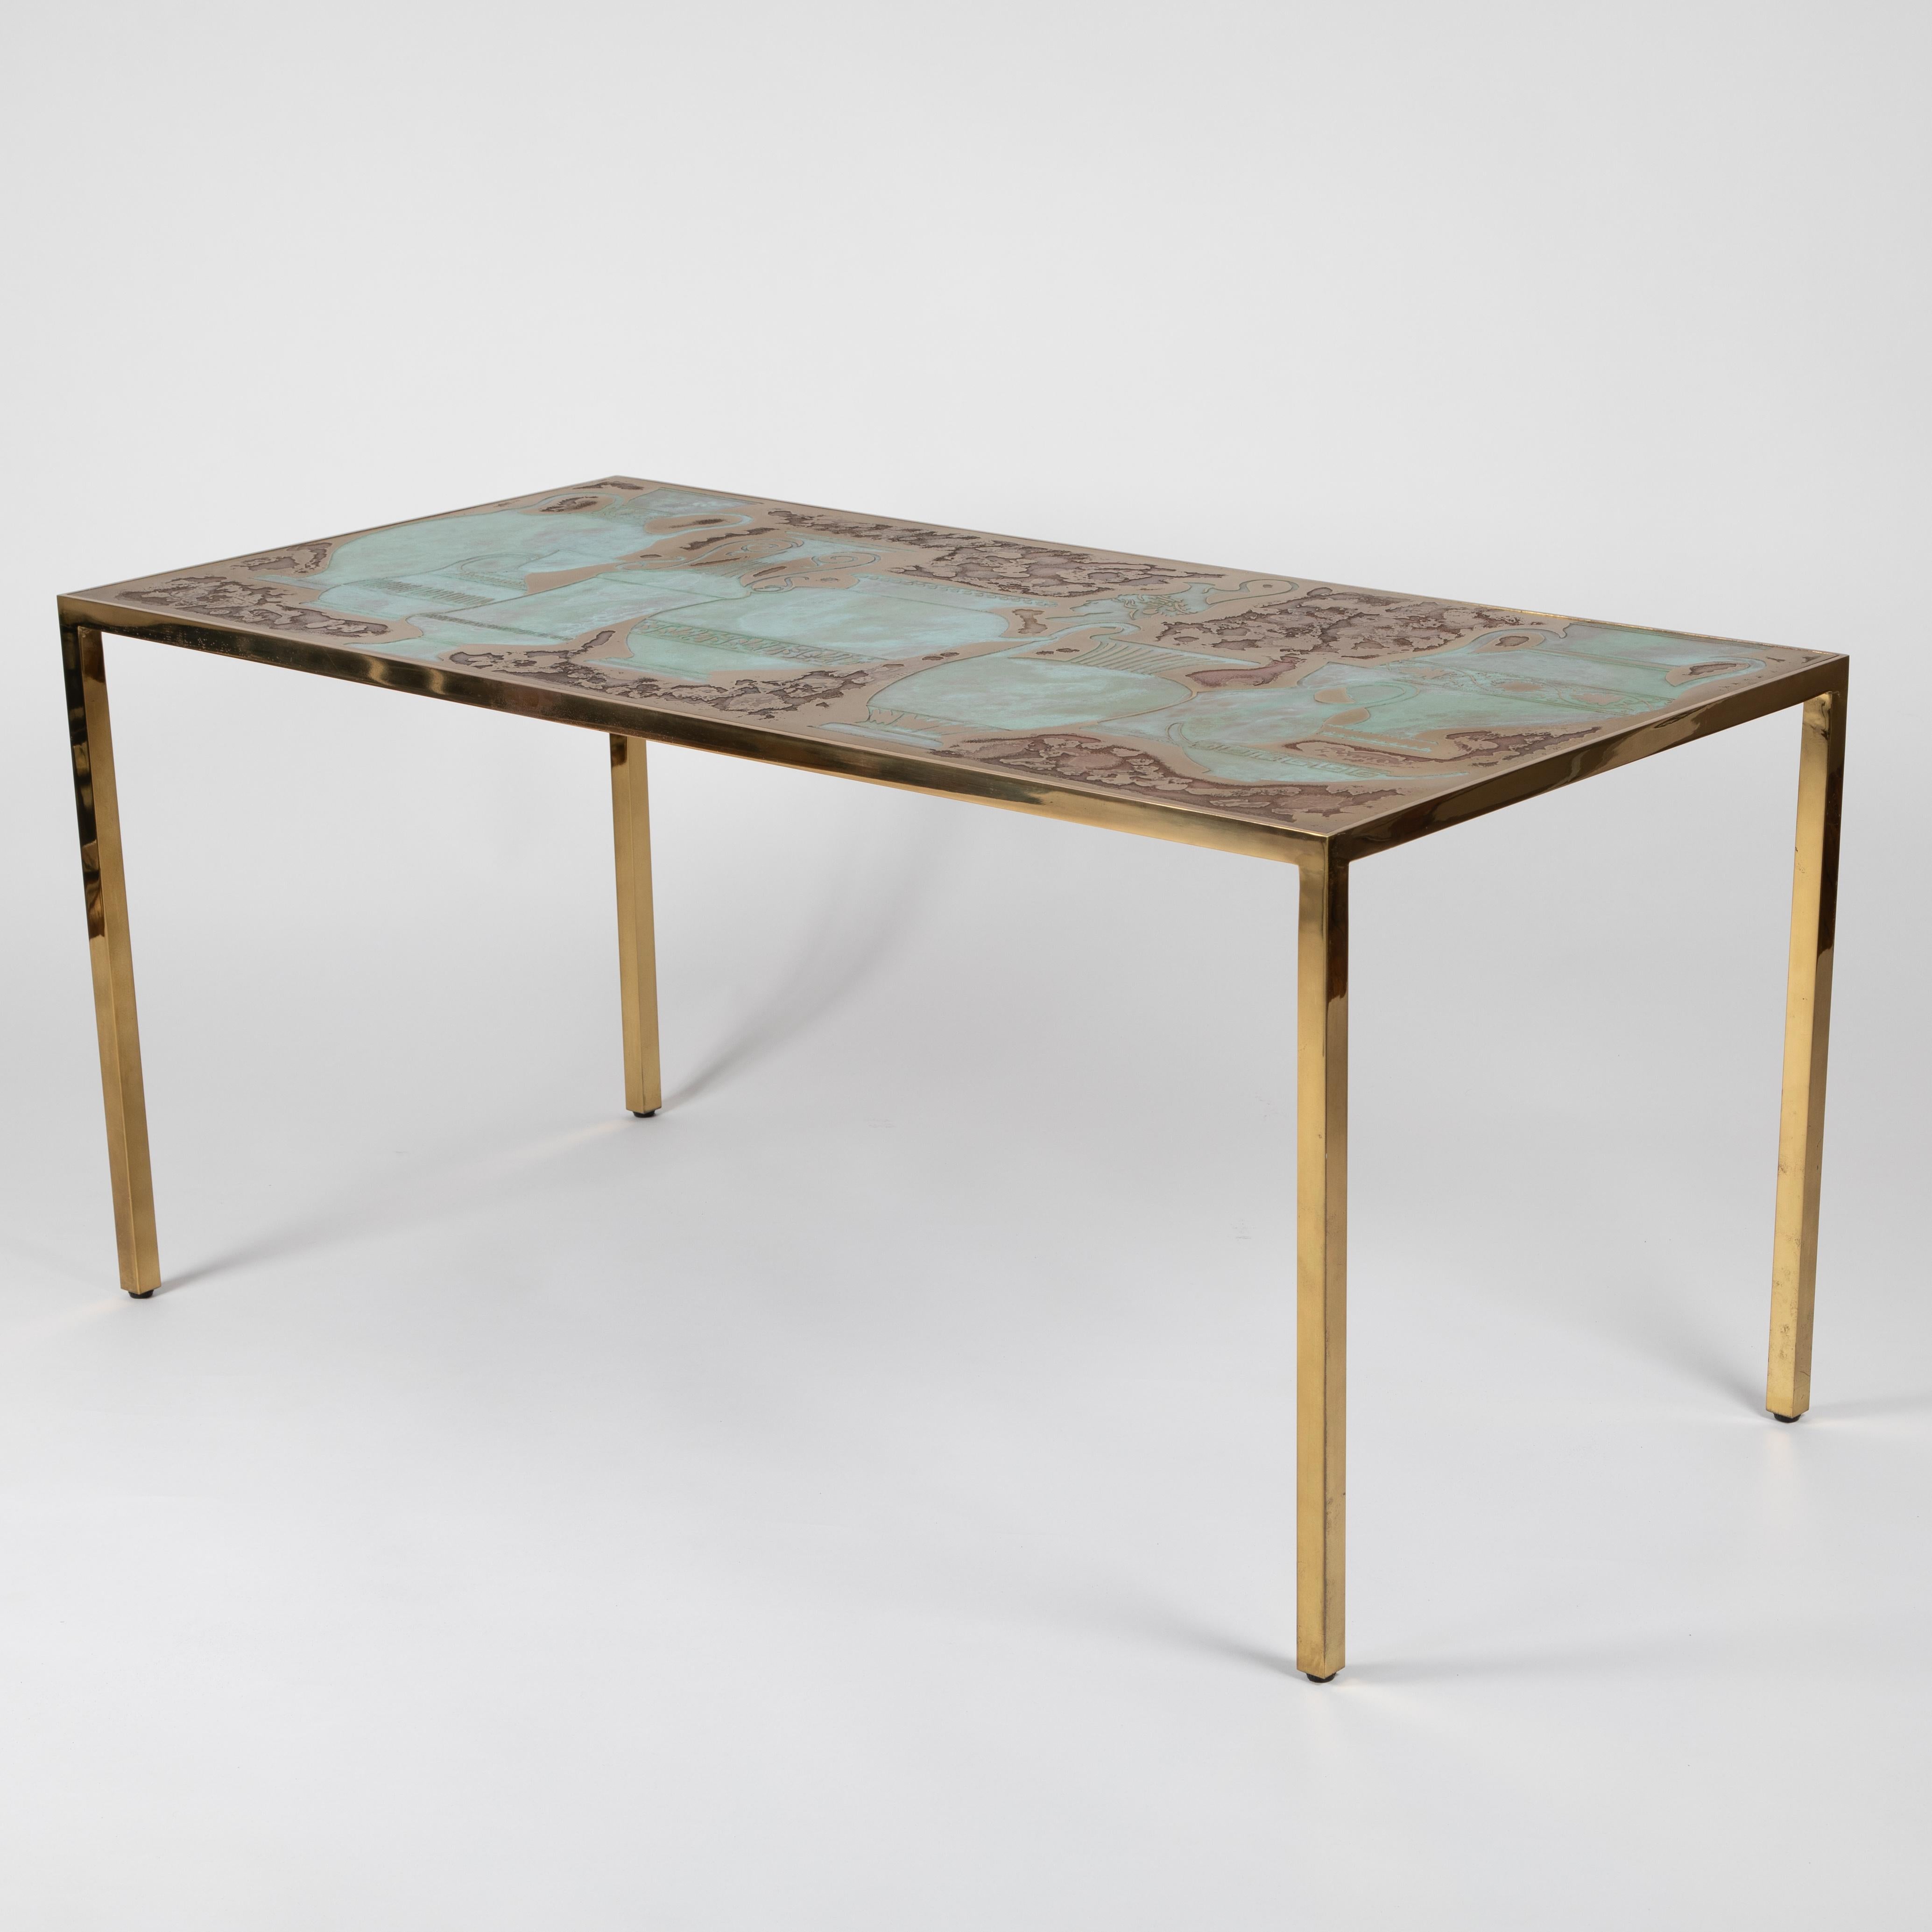 American Rare Harvey Probber Acid-Etched and Patinated Bronze Sofa Table, circa 1960s